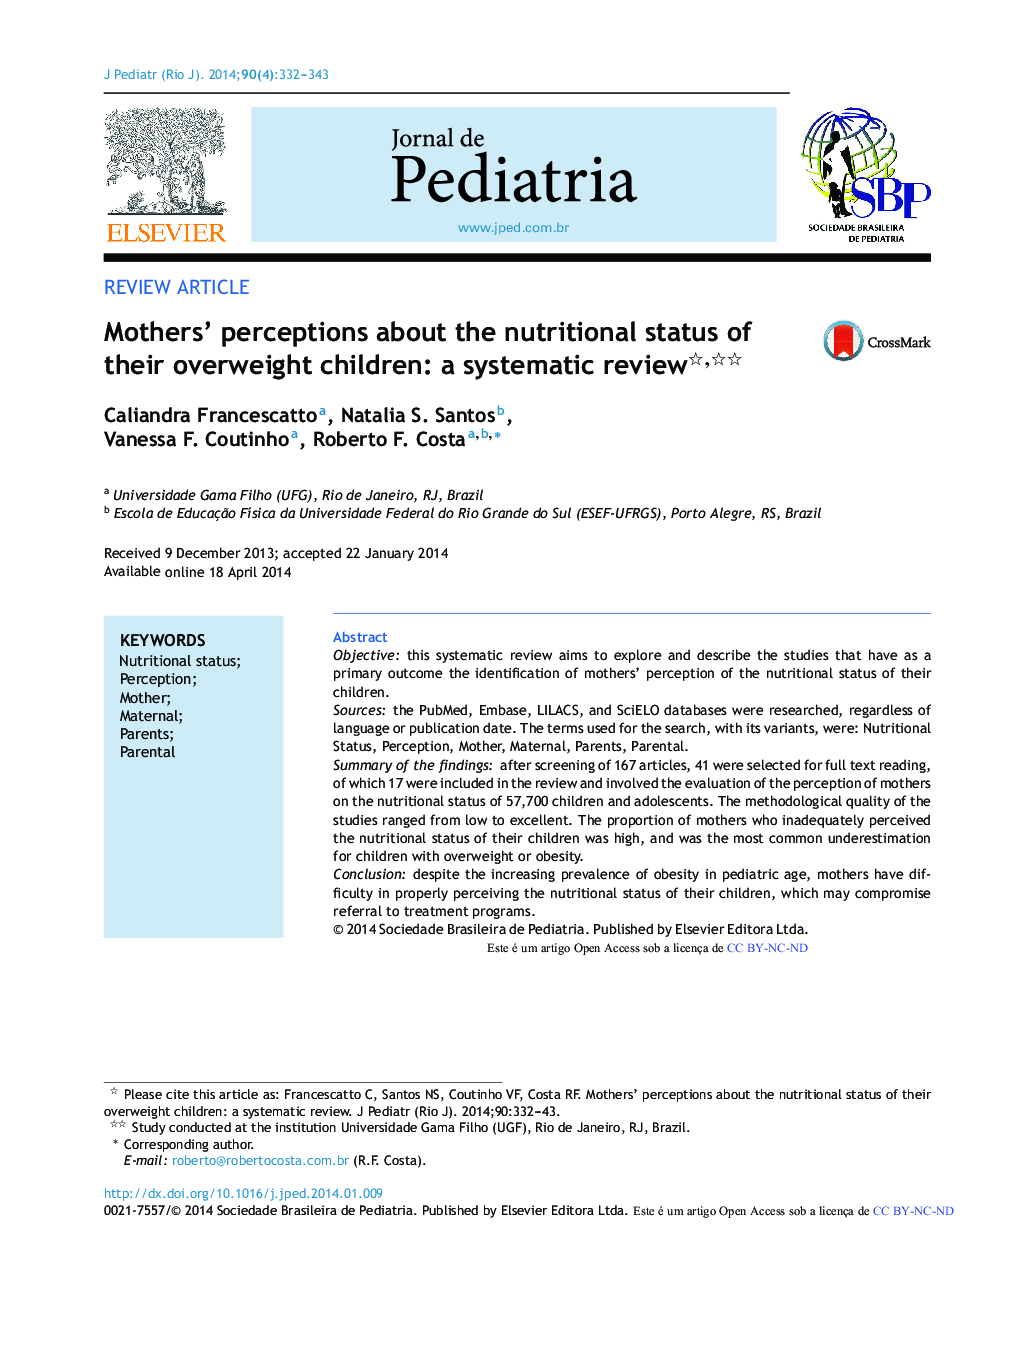 Mothers’ perceptions about the nutritional status of their overweight children: a systematic review 